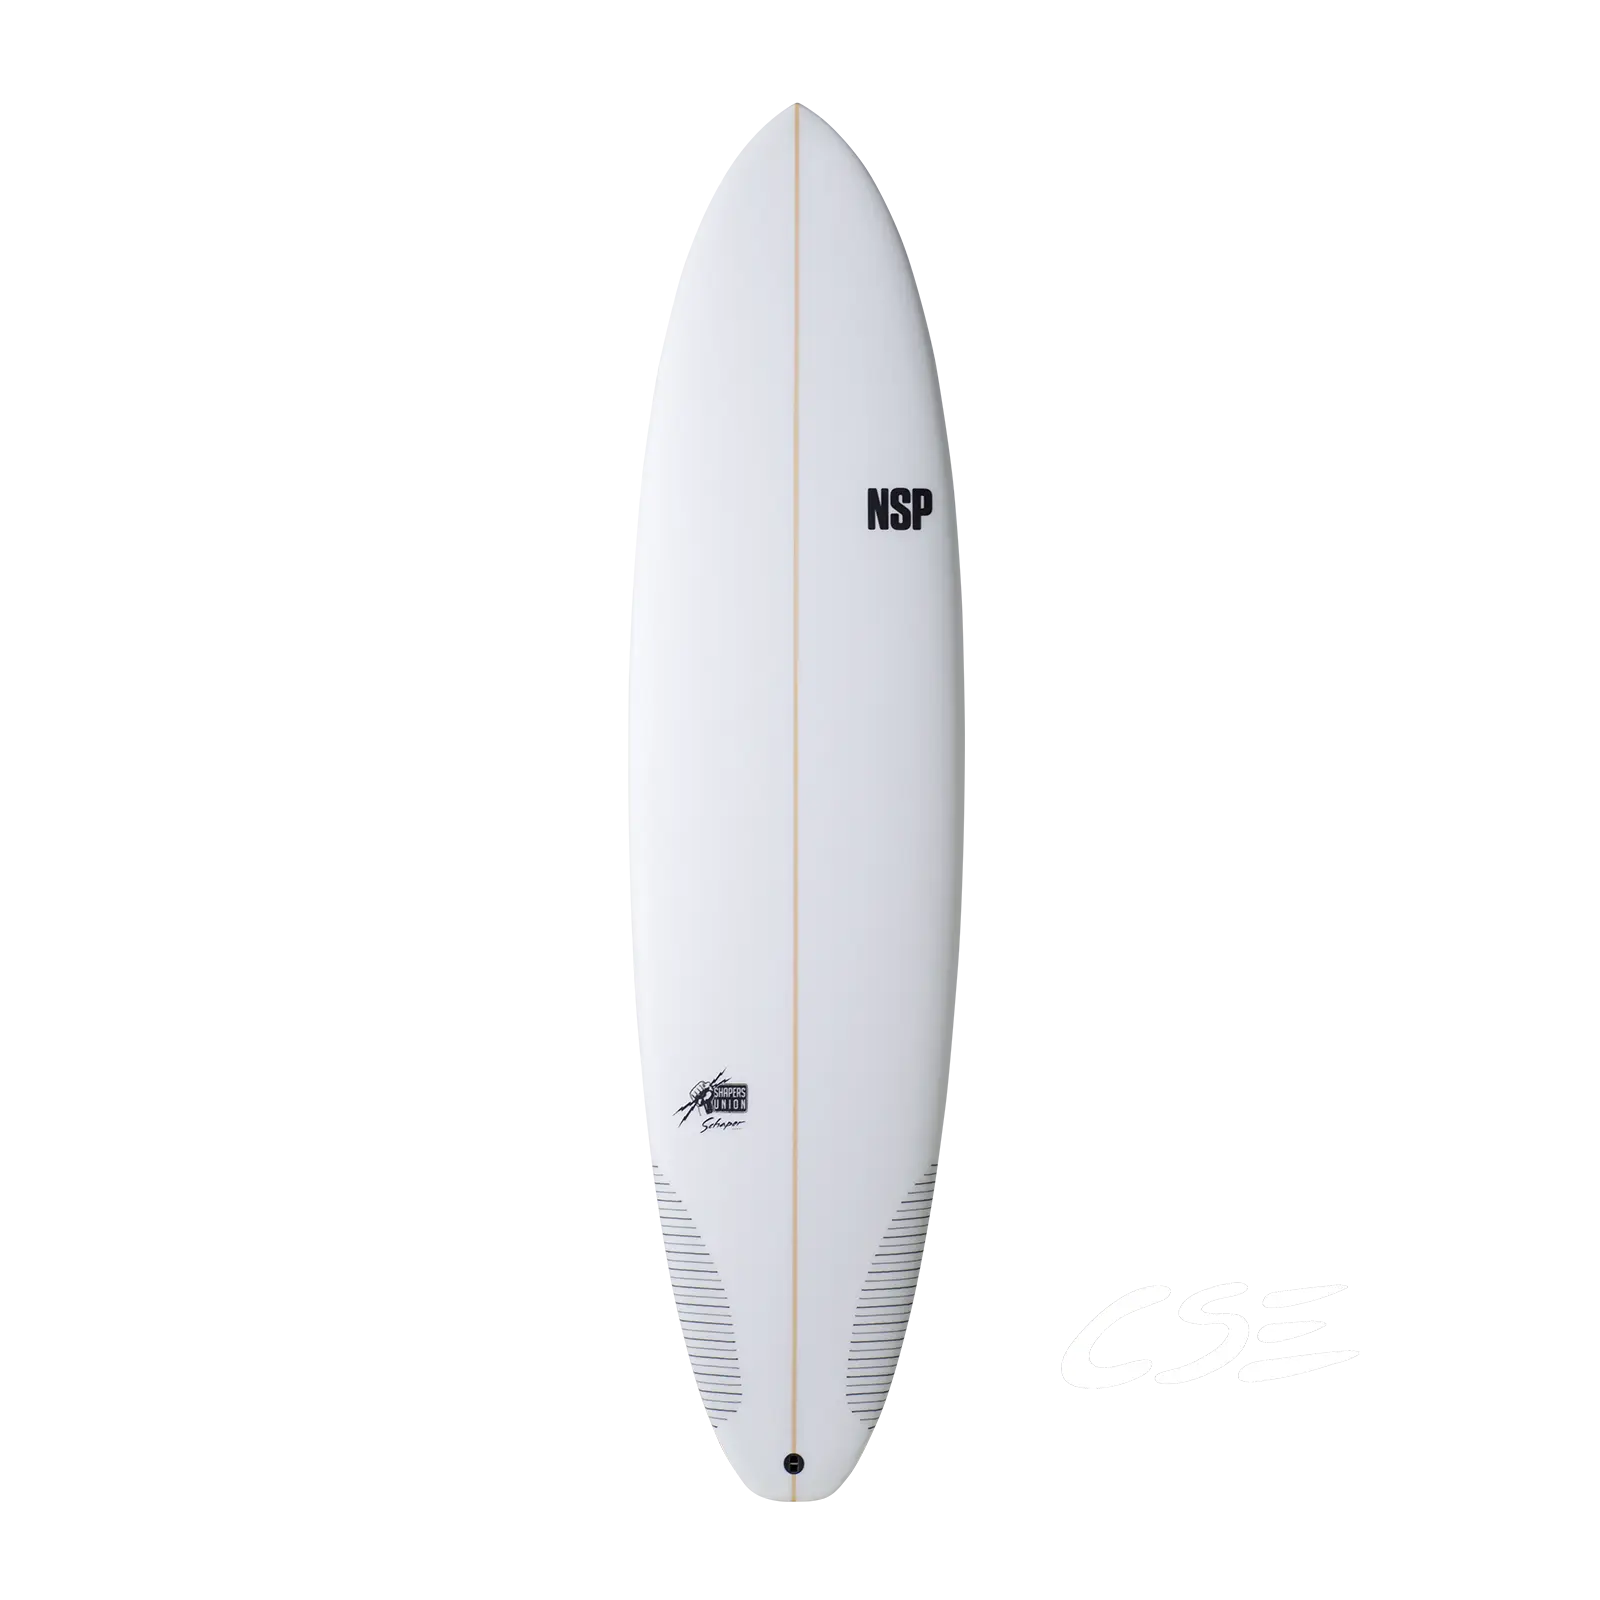 The Cheater Surfboards NSP 7'0" | 44.2 L 